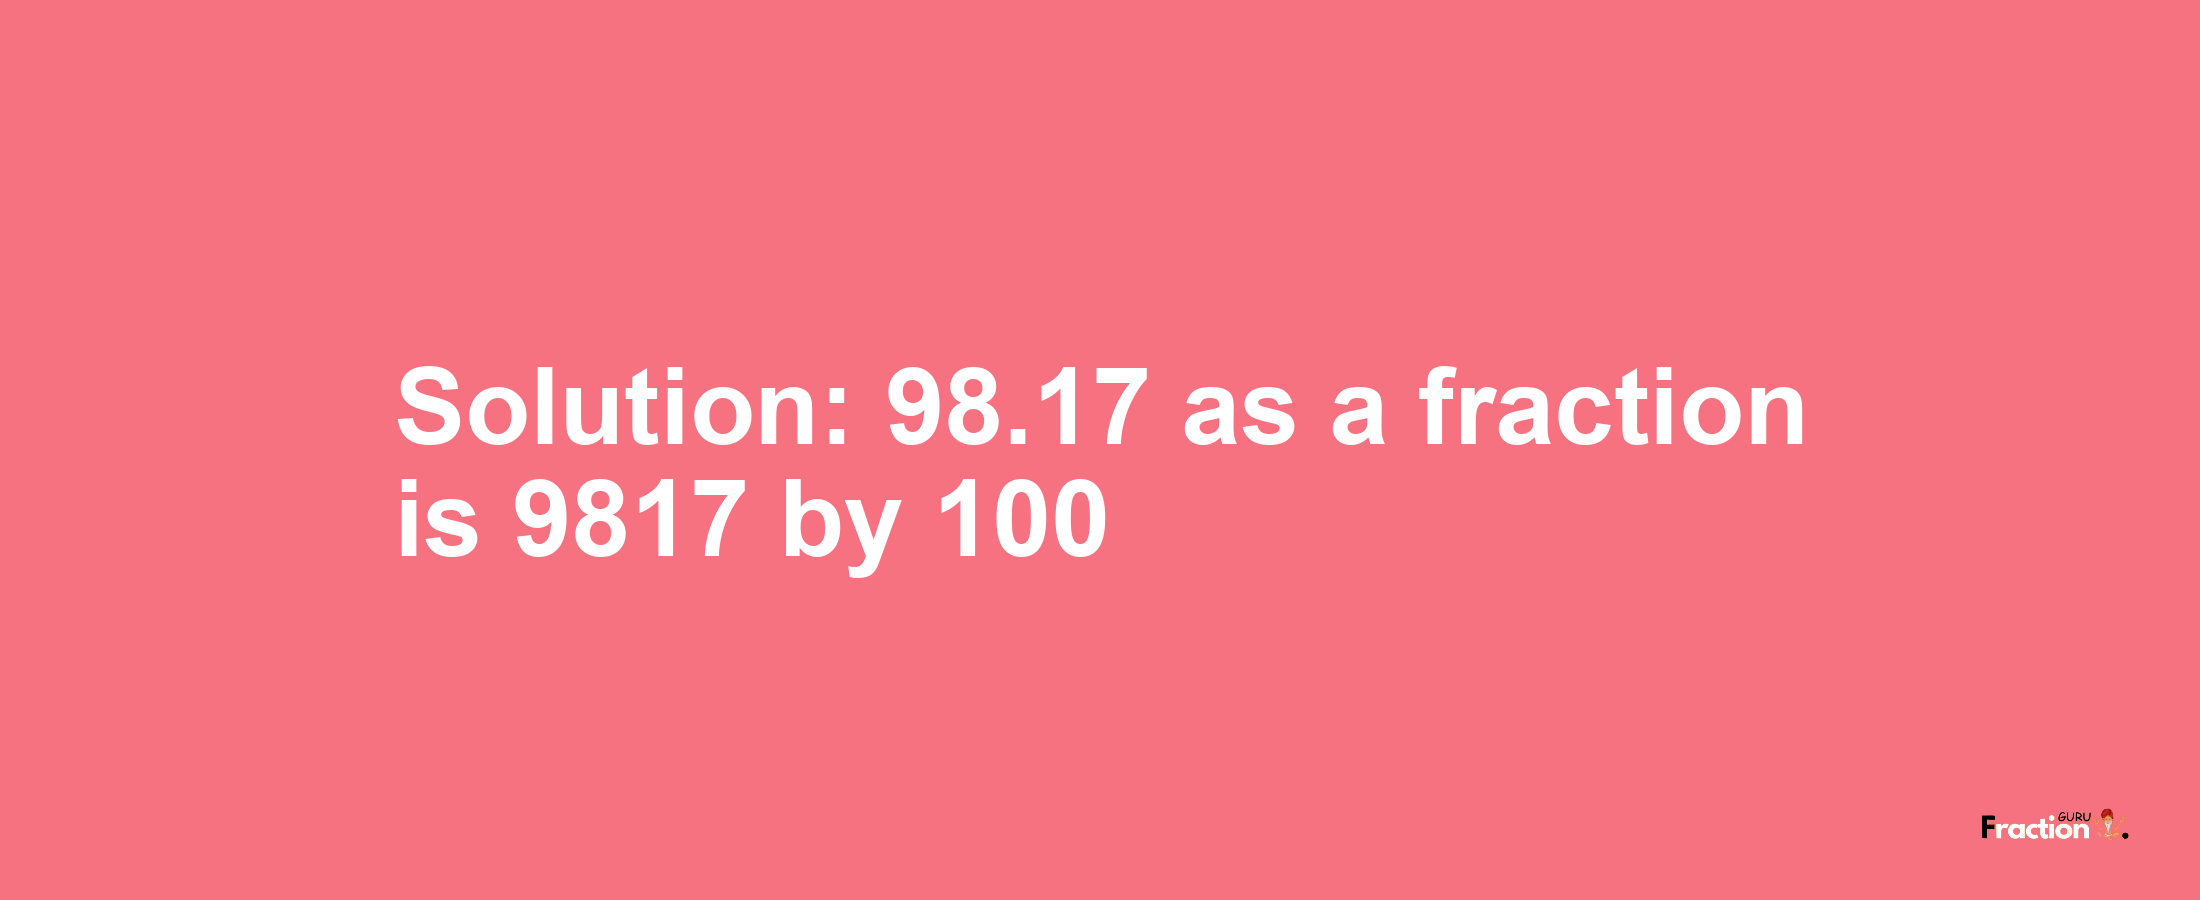 Solution:98.17 as a fraction is 9817/100